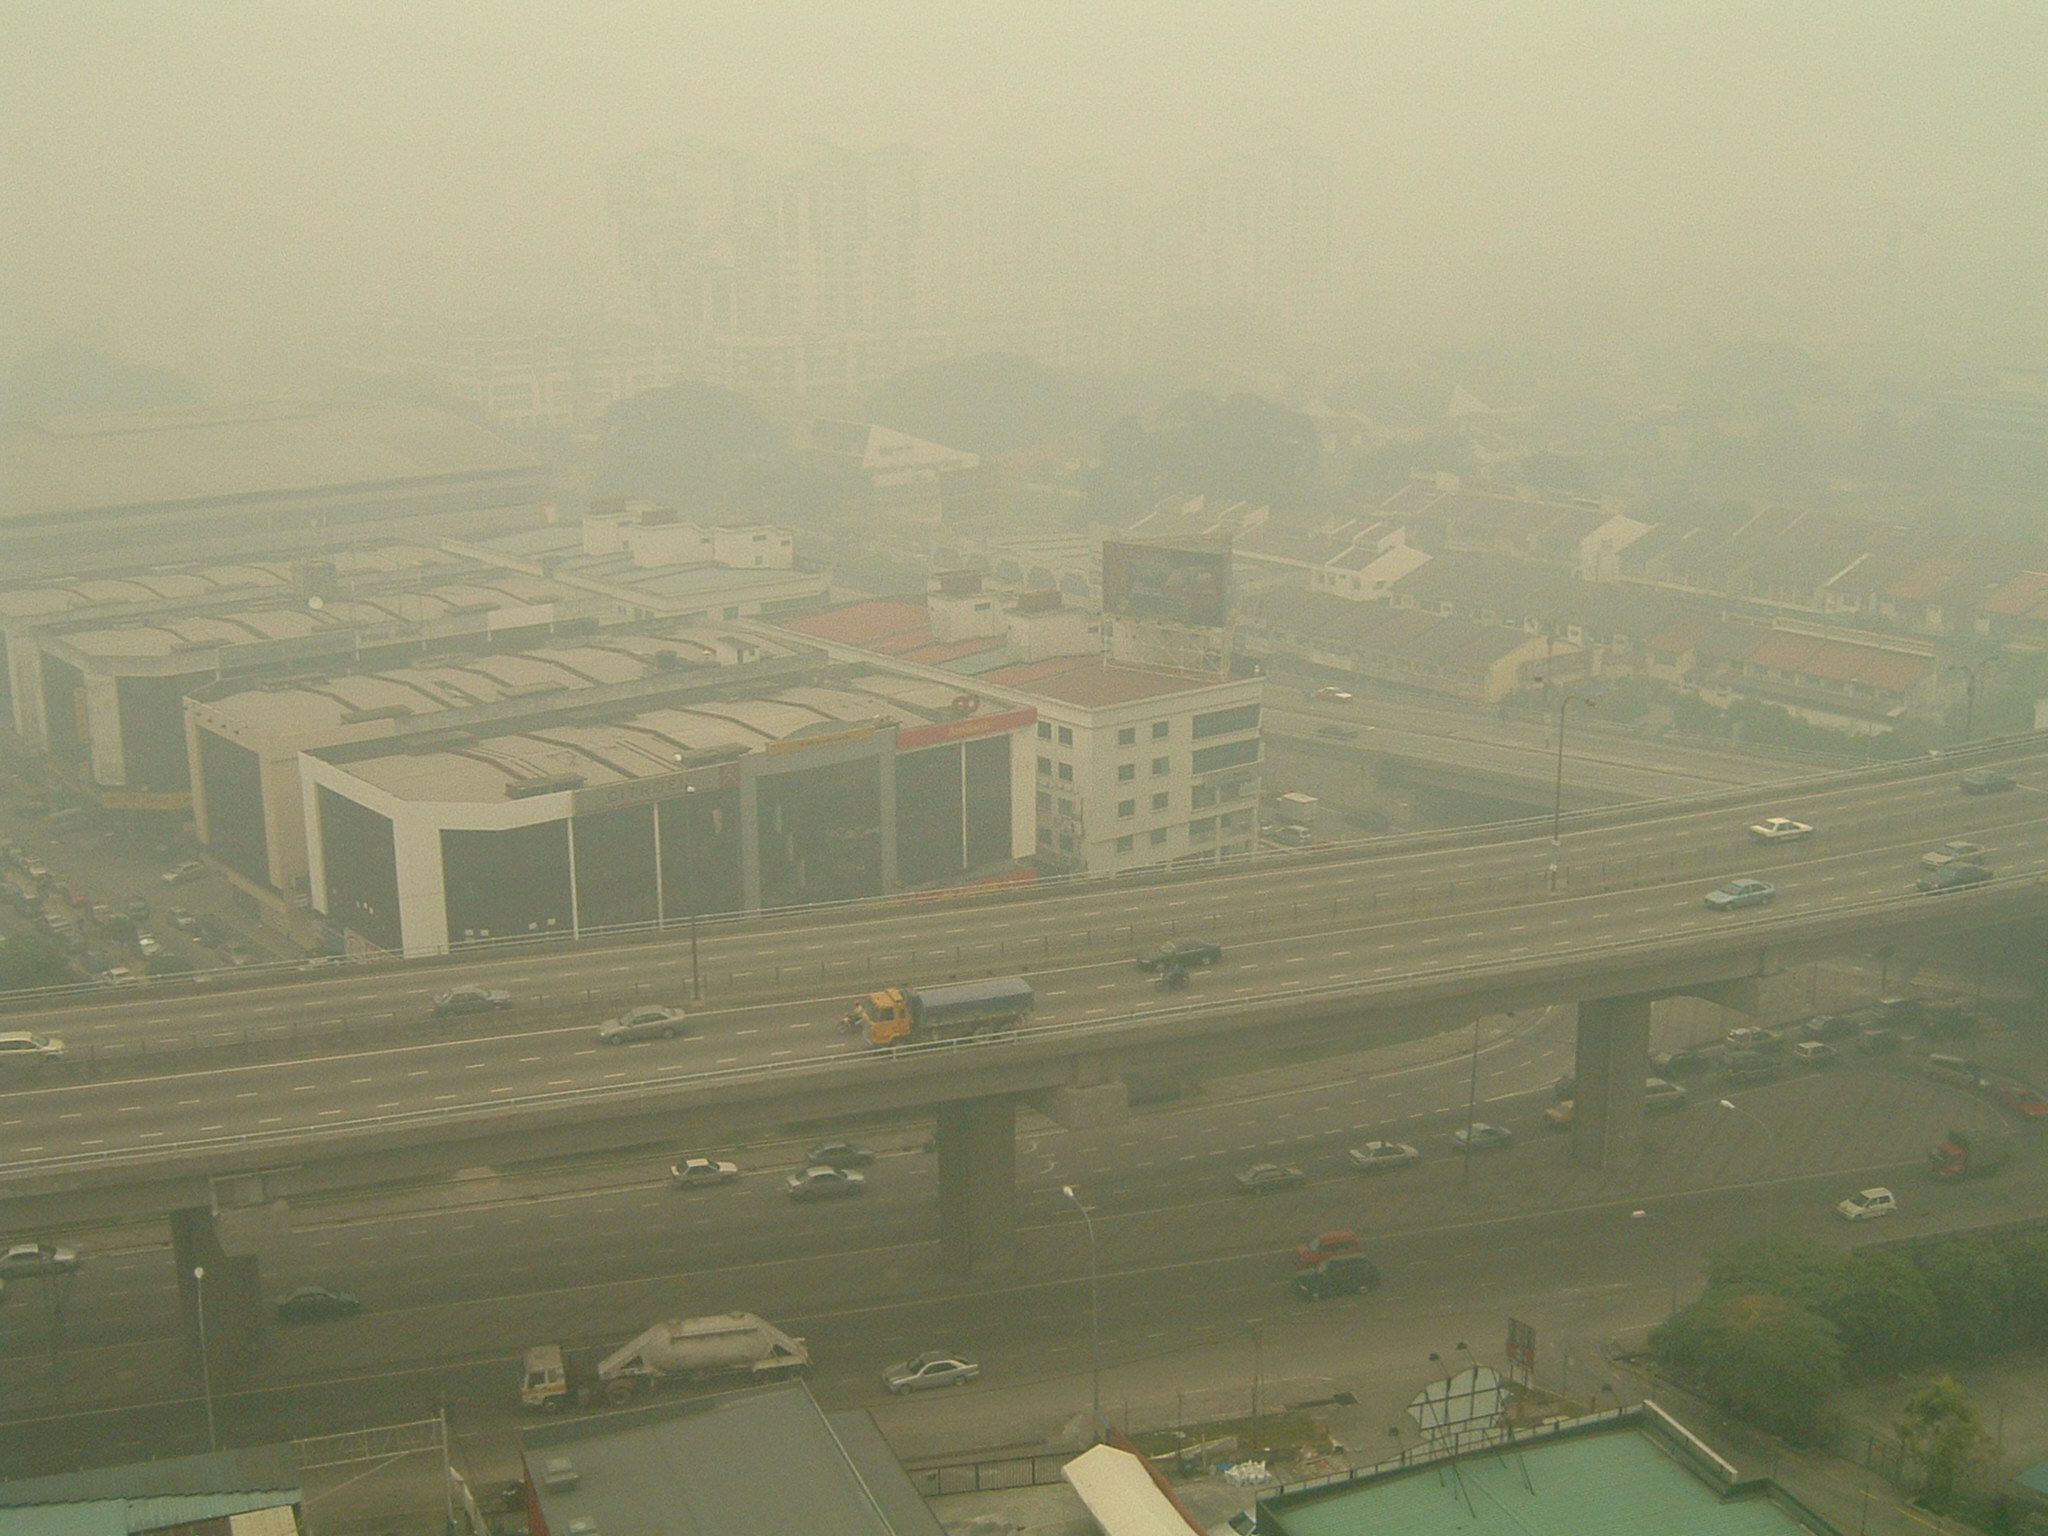 Land-clearing fires in the neighbouring countries polluting air in Malaysia